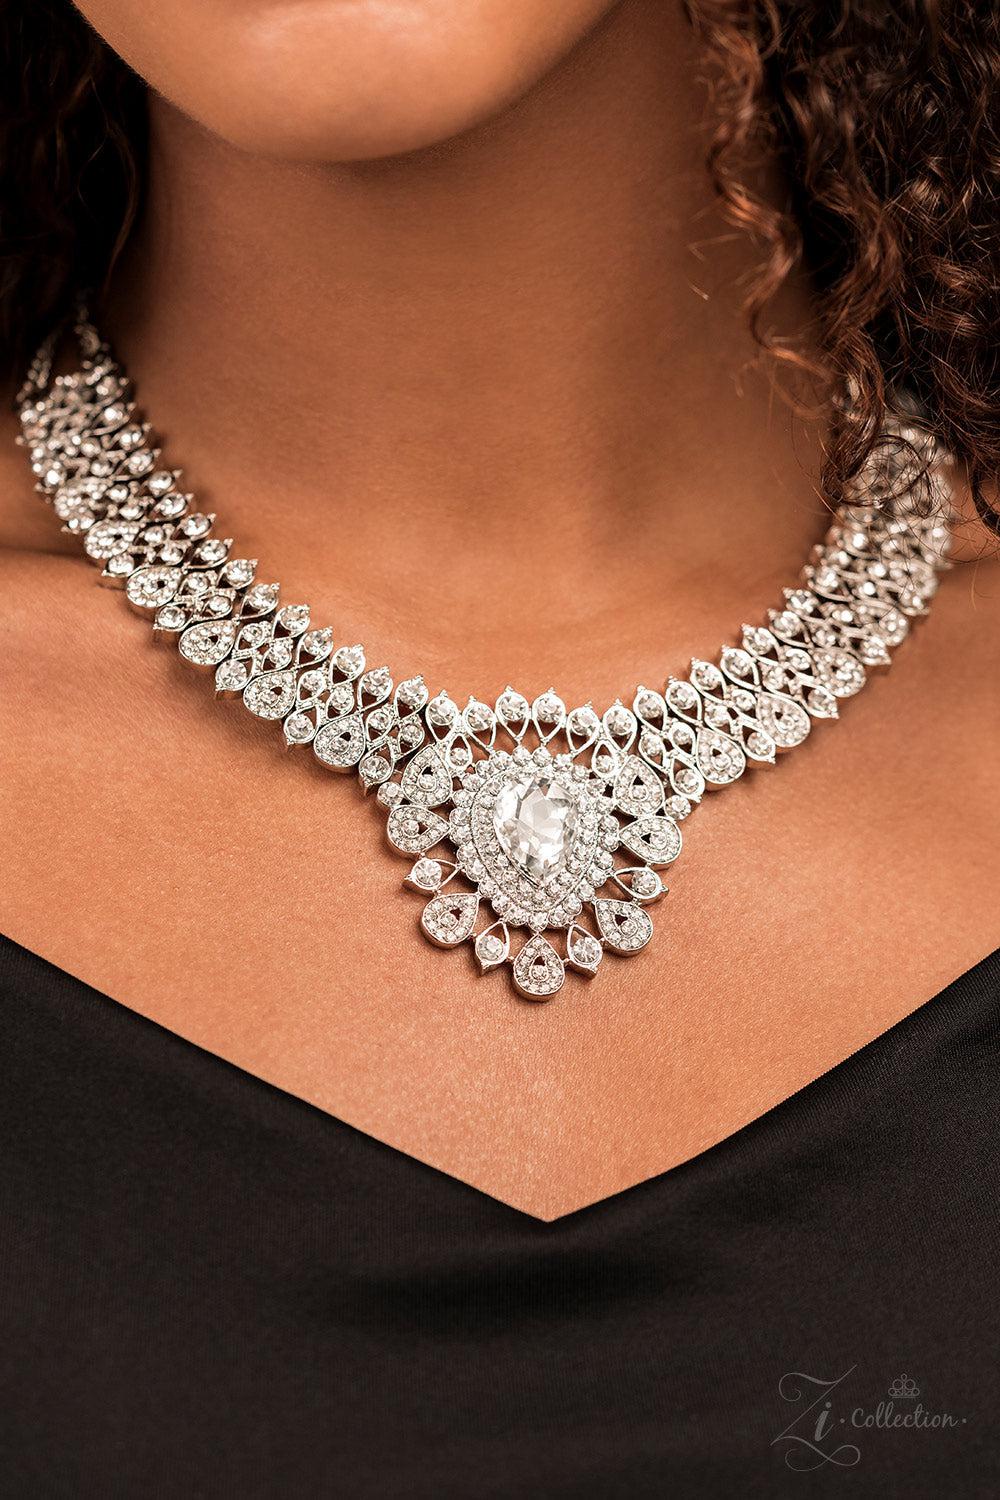 Exquisite 2022 Zi Collection Necklace - Paparazzi Accessories-on model - CarasShop.com - $5 Jewelry by Cara Jewels